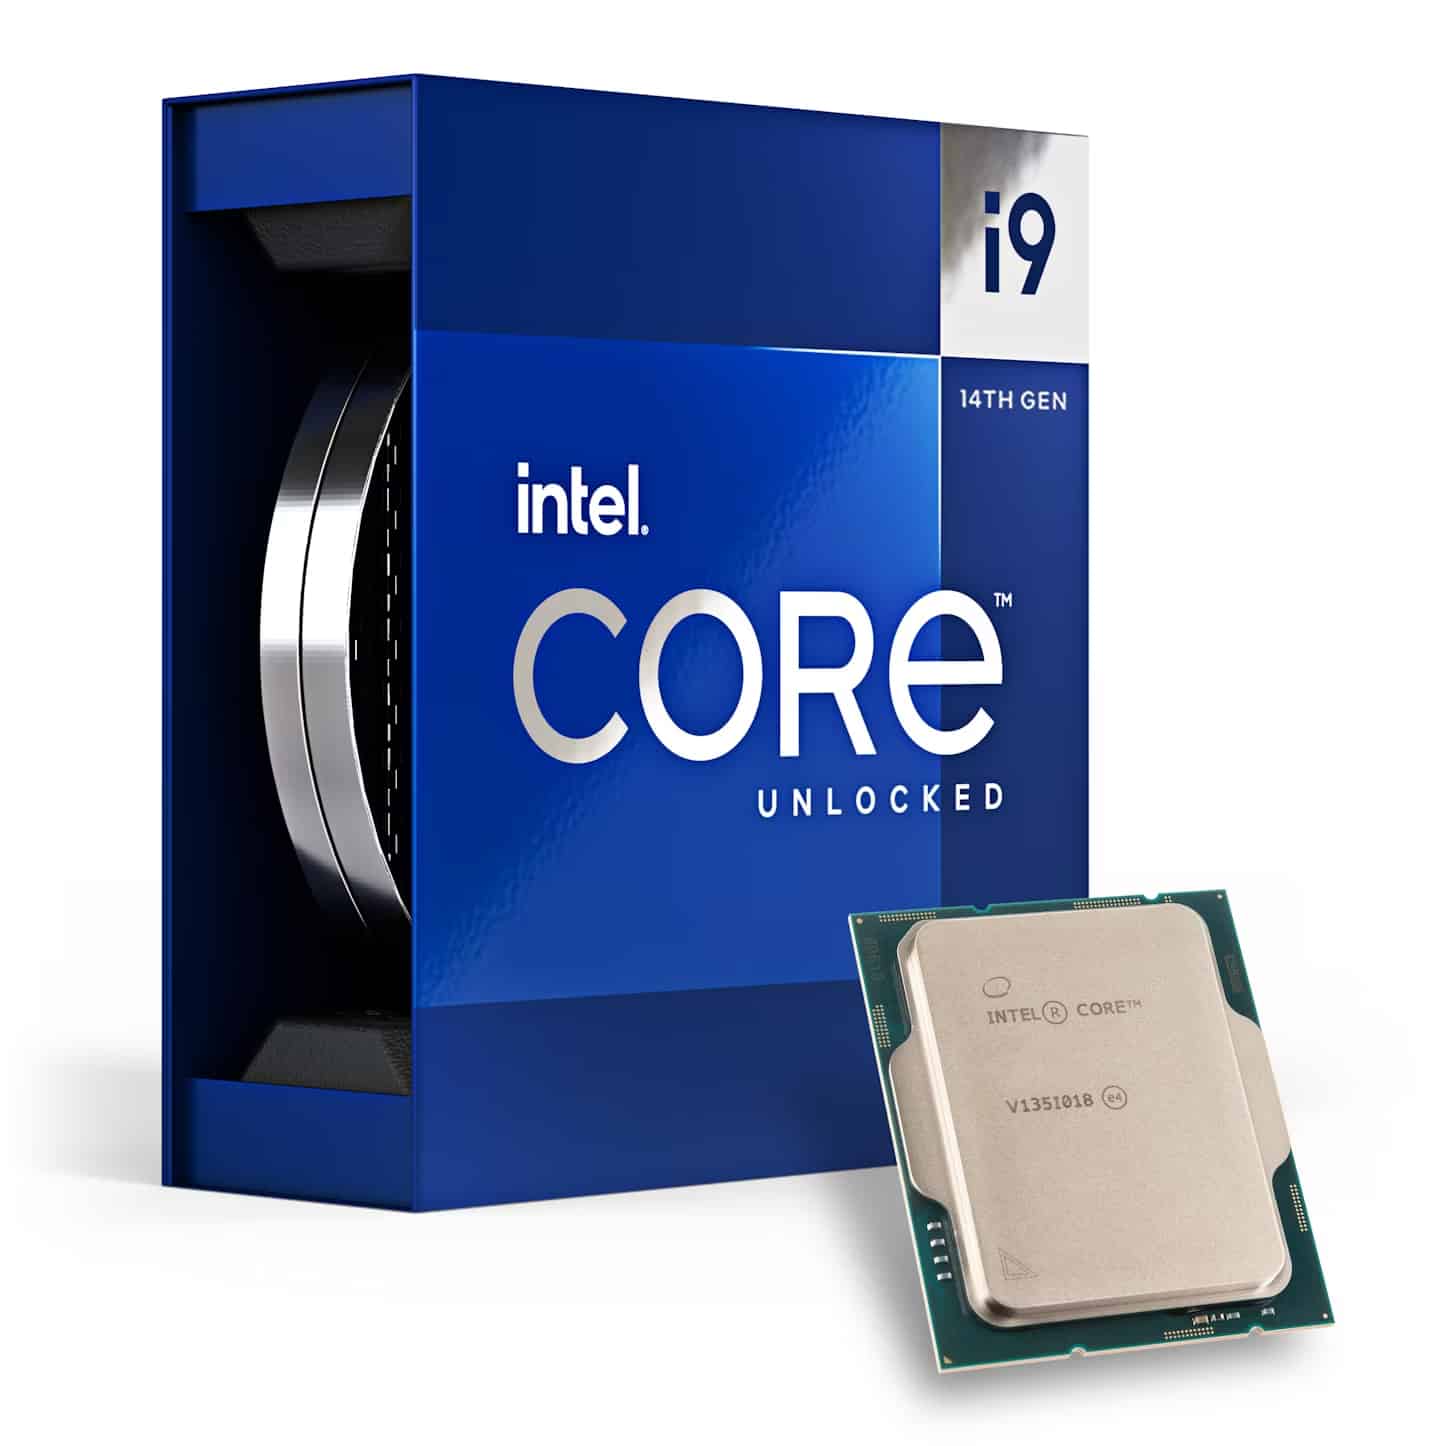 Intel Core i9-14900KS unlocked 14th generation CPU with packaging.